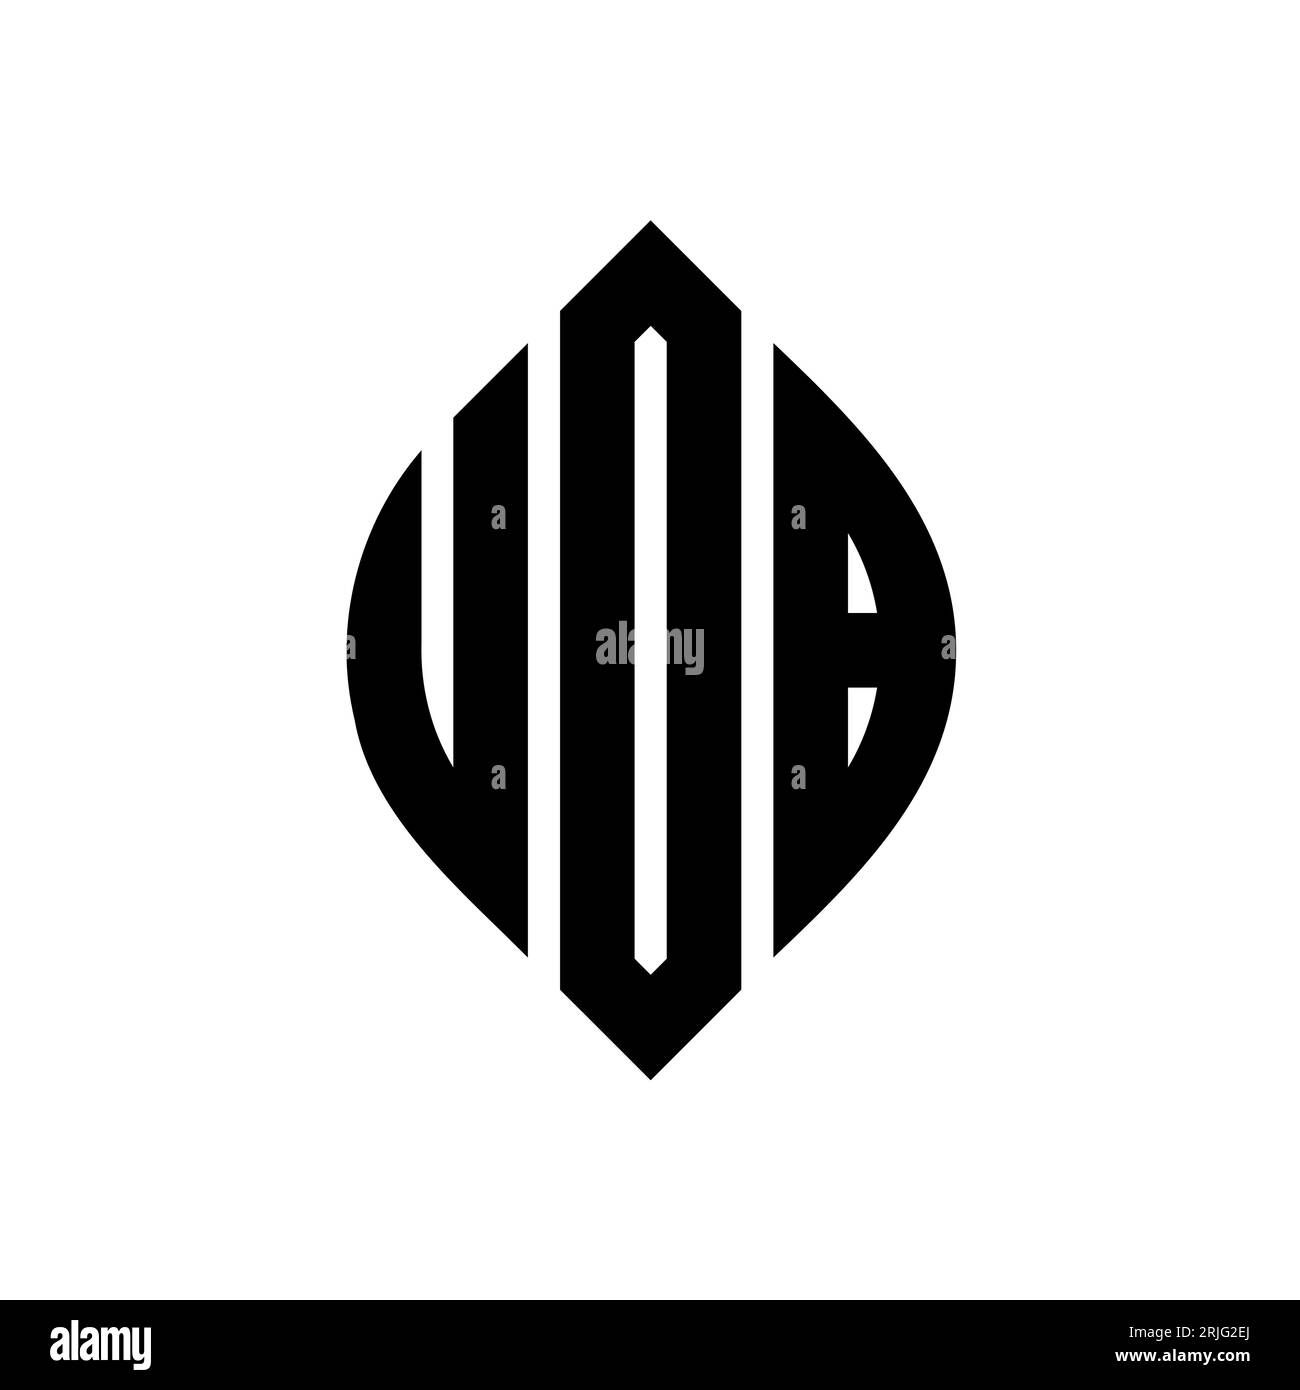 UOB circle letter logo design with circle and ellipse shape. UOB ellipse letters with typographic style. The three initials form a circle logo. UOB Ci Stock Vector